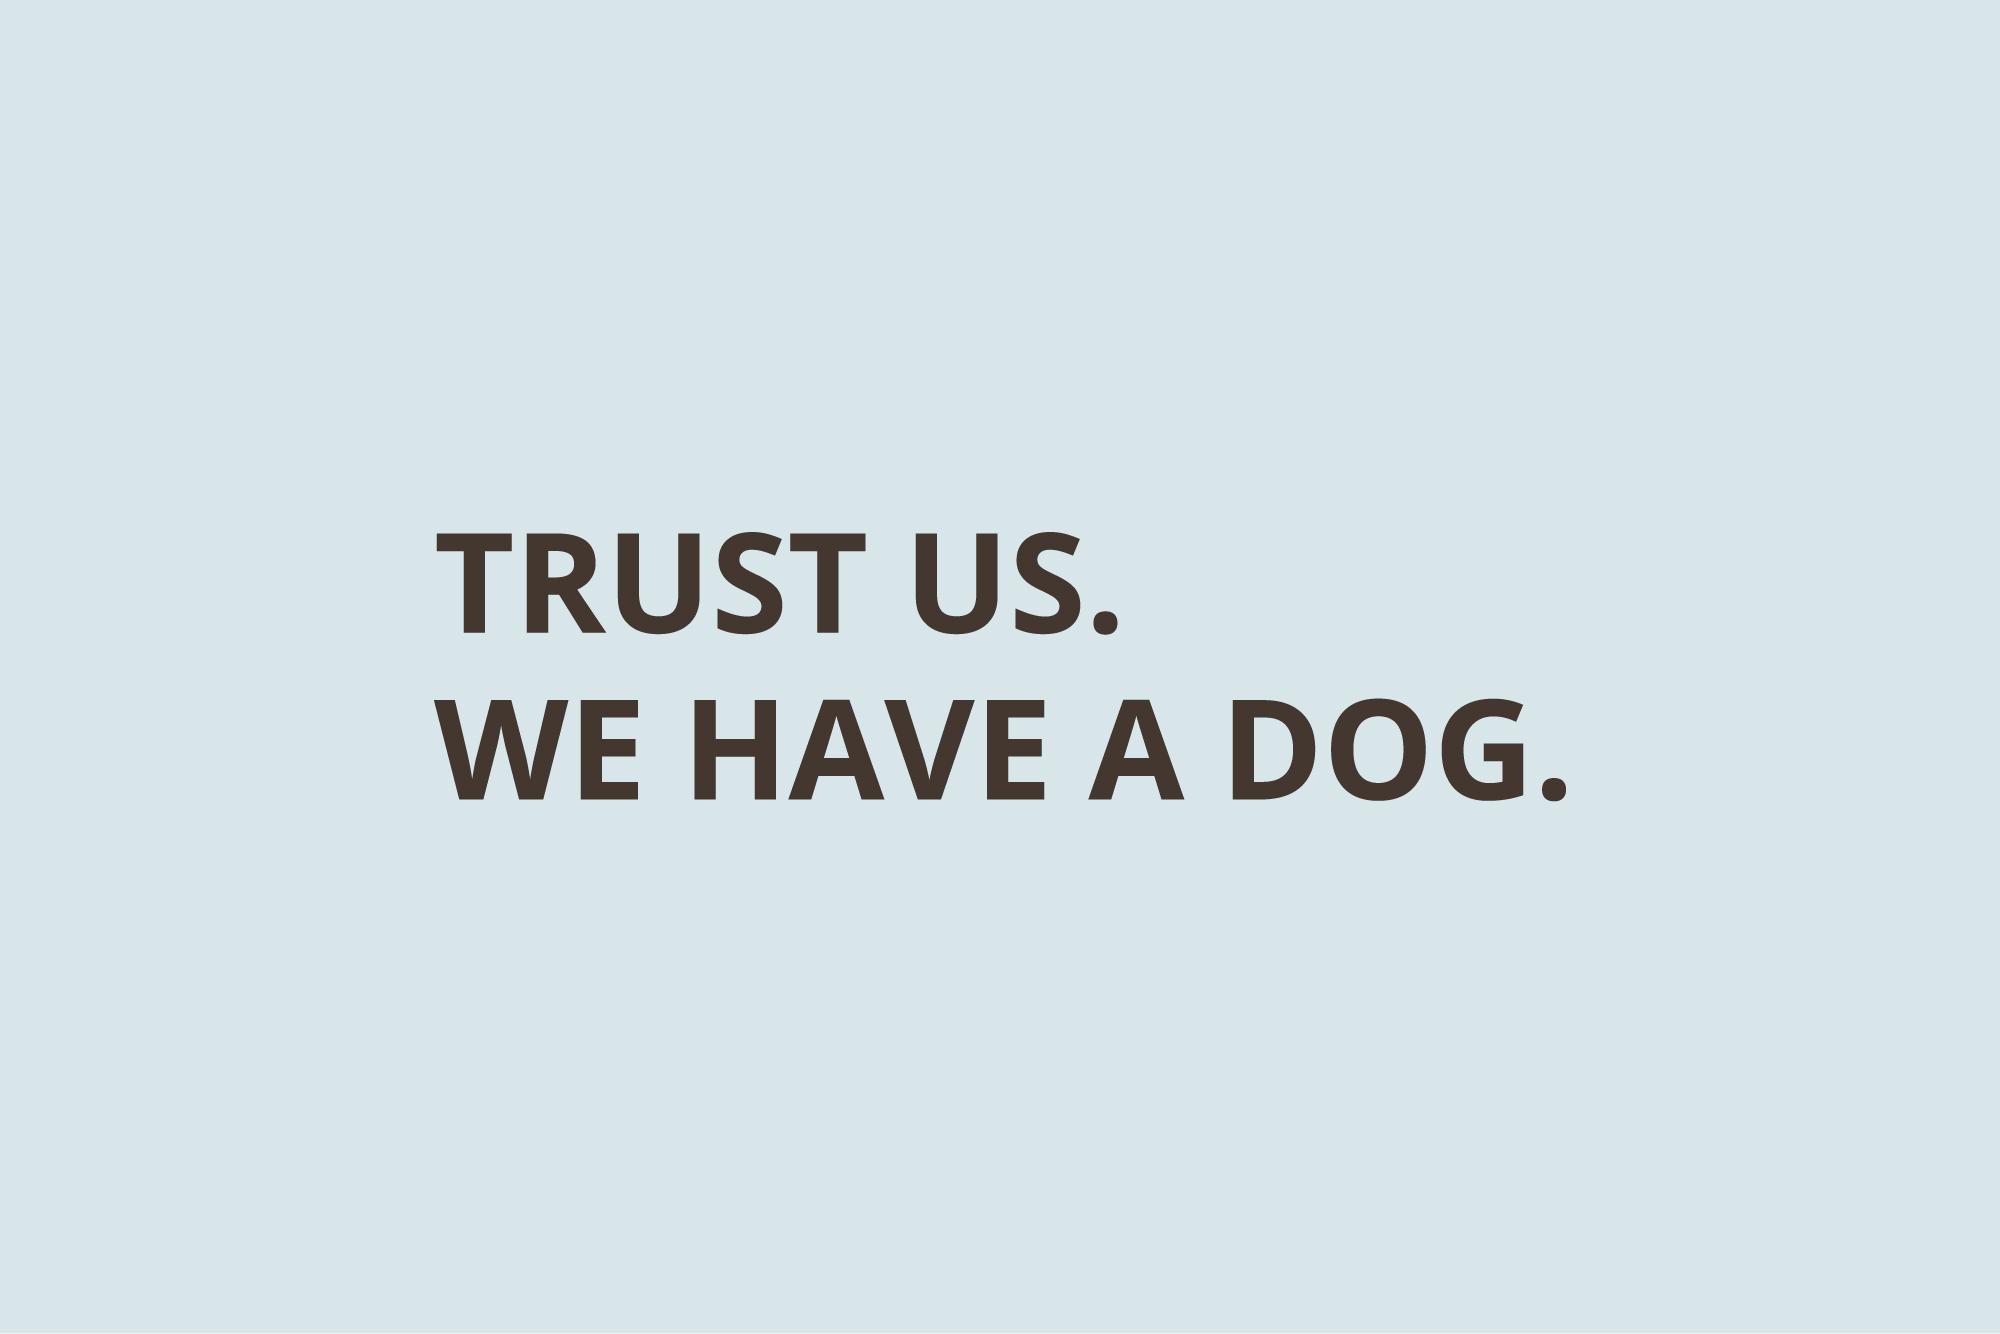 Helland Law Group tagline: Trust us we have a dog.